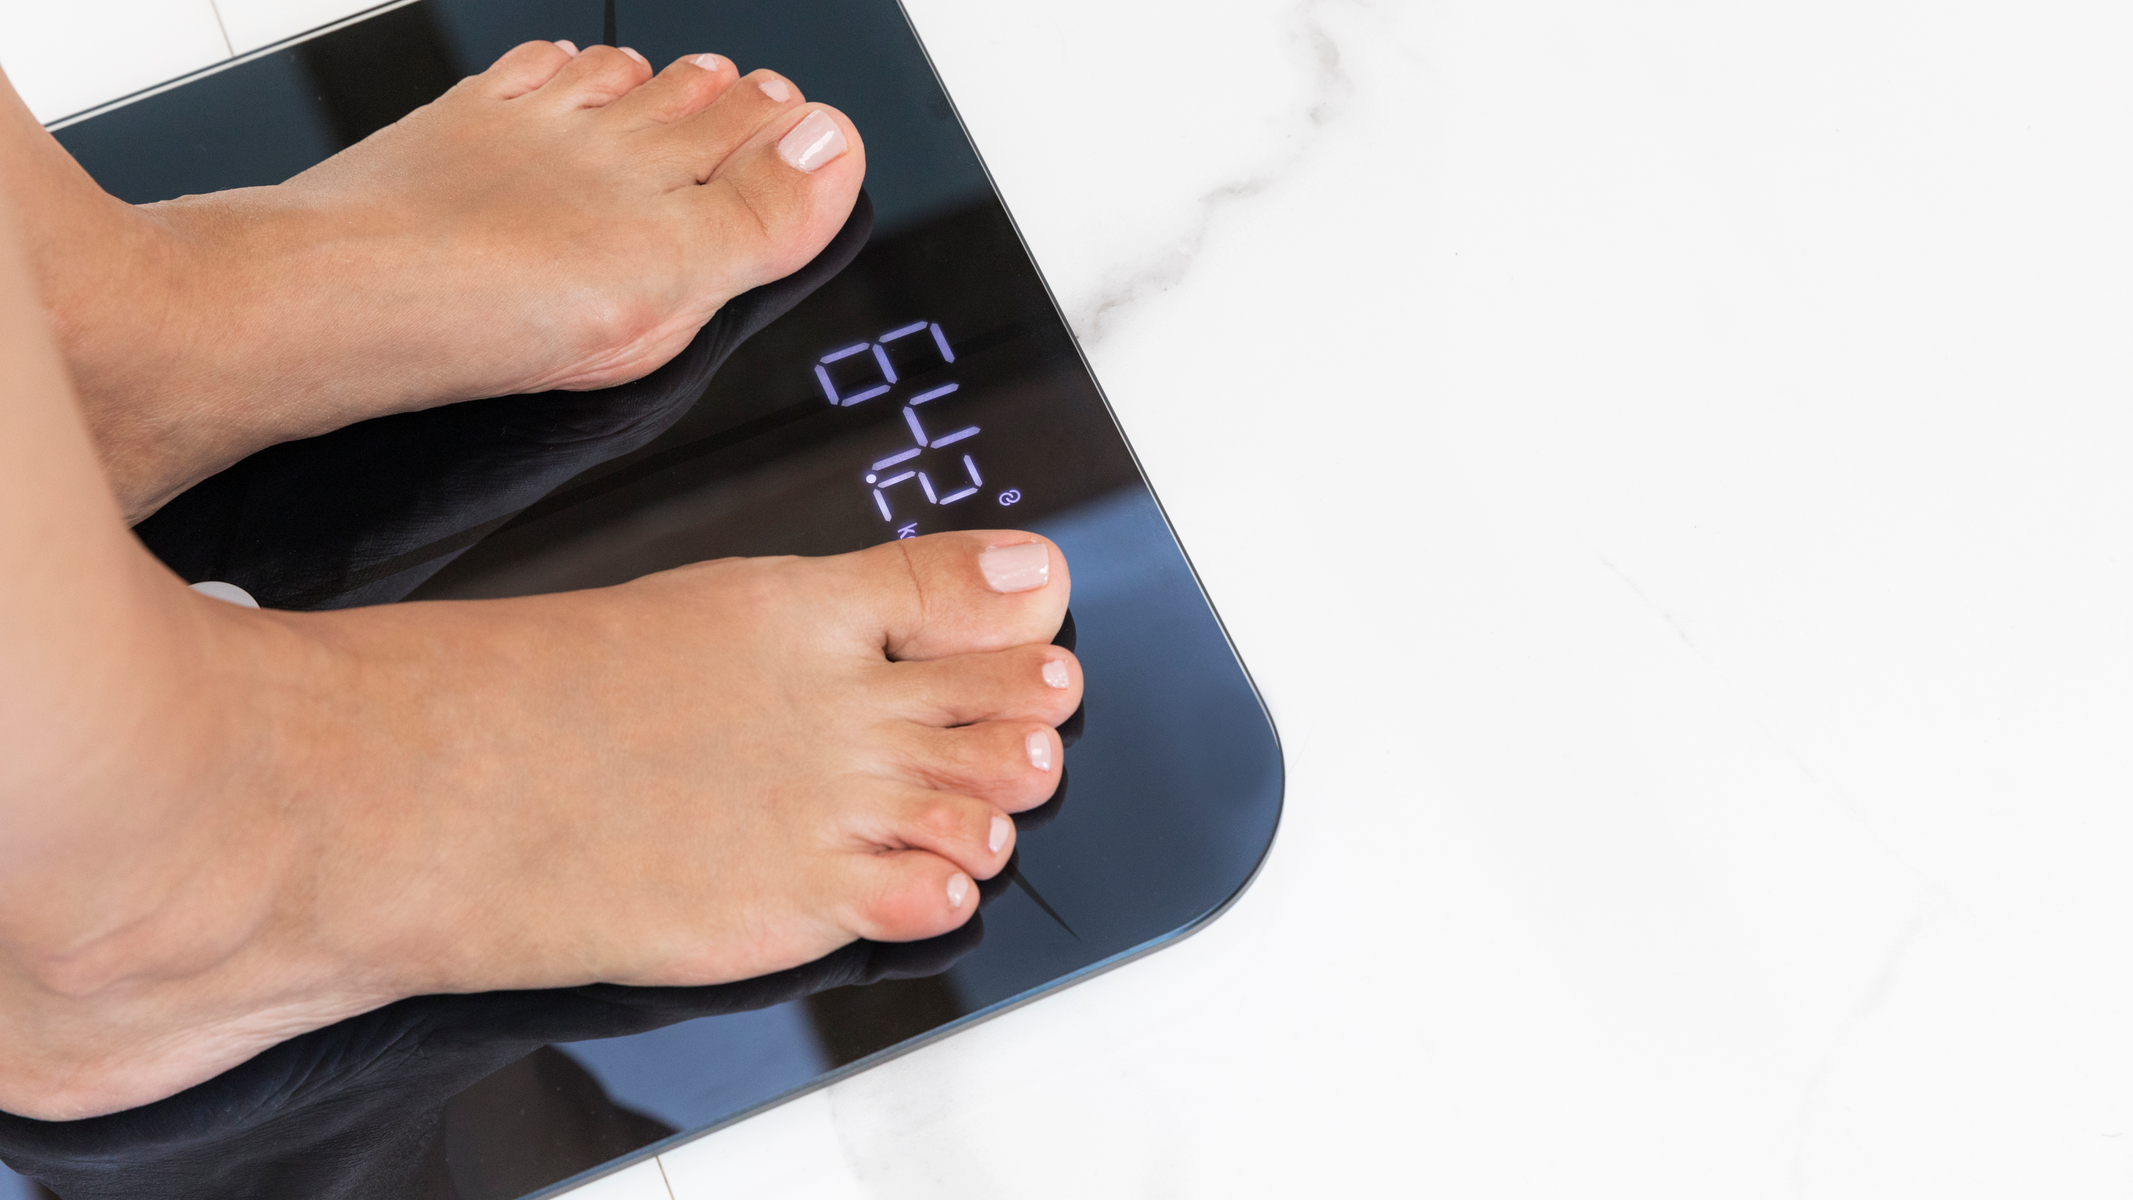 CECOTEC Surface Precision 9750 Healthy Smart Personal Scale